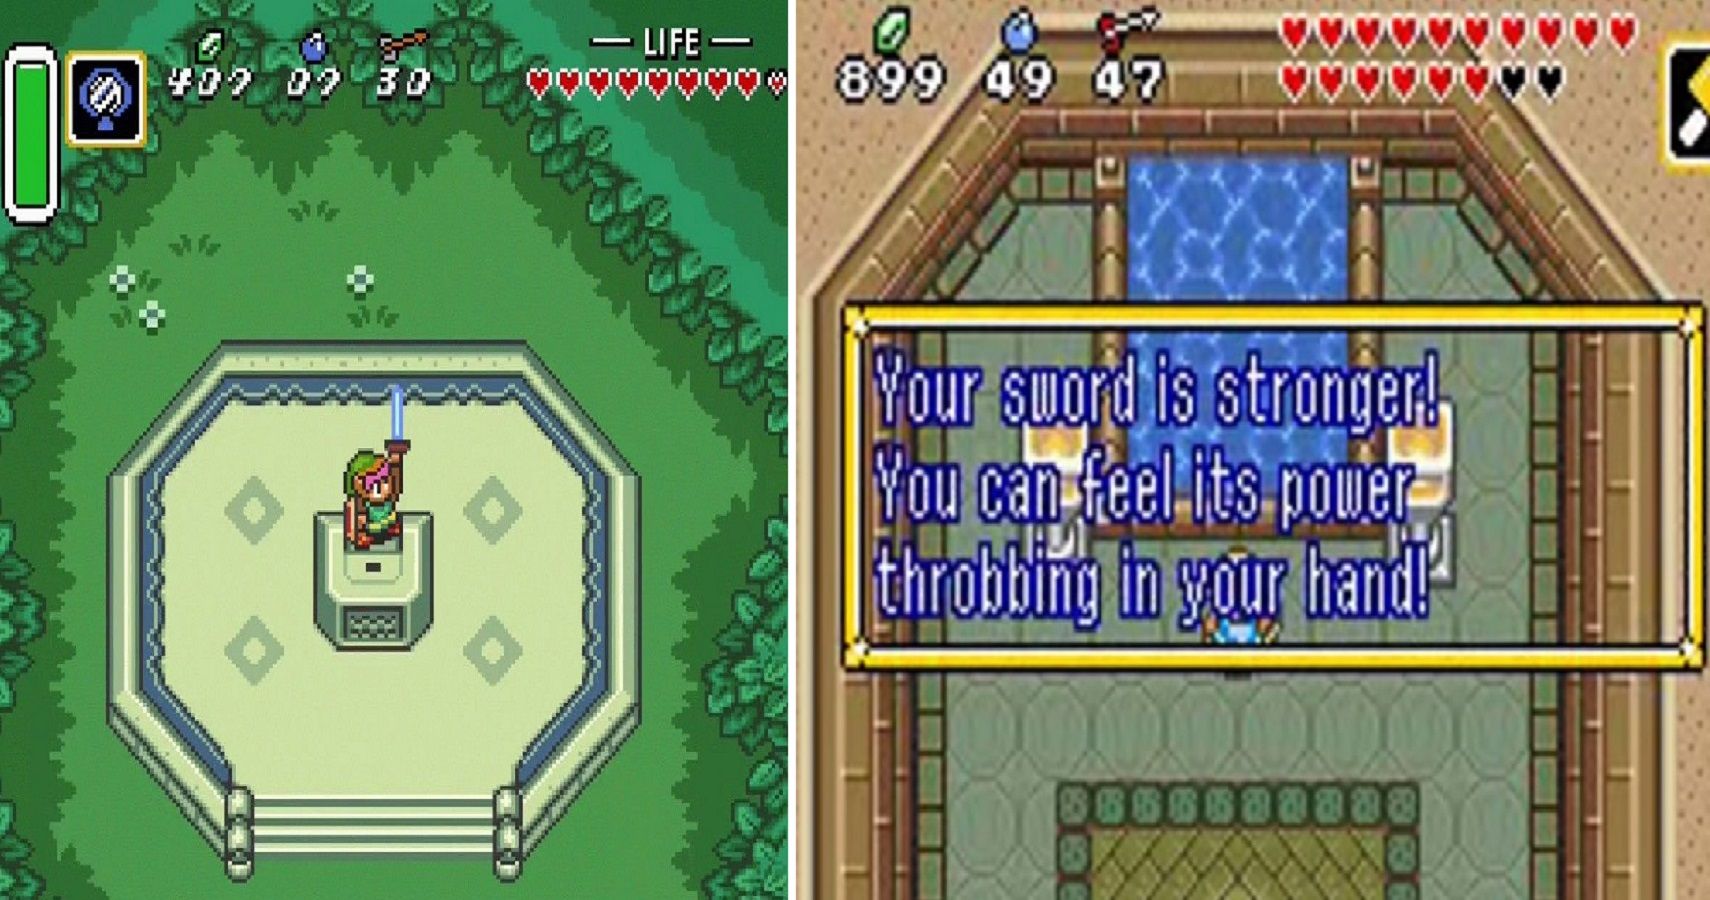 The Master Sword and the Golden Sword in The Legend of Zelda- A Link To The Past